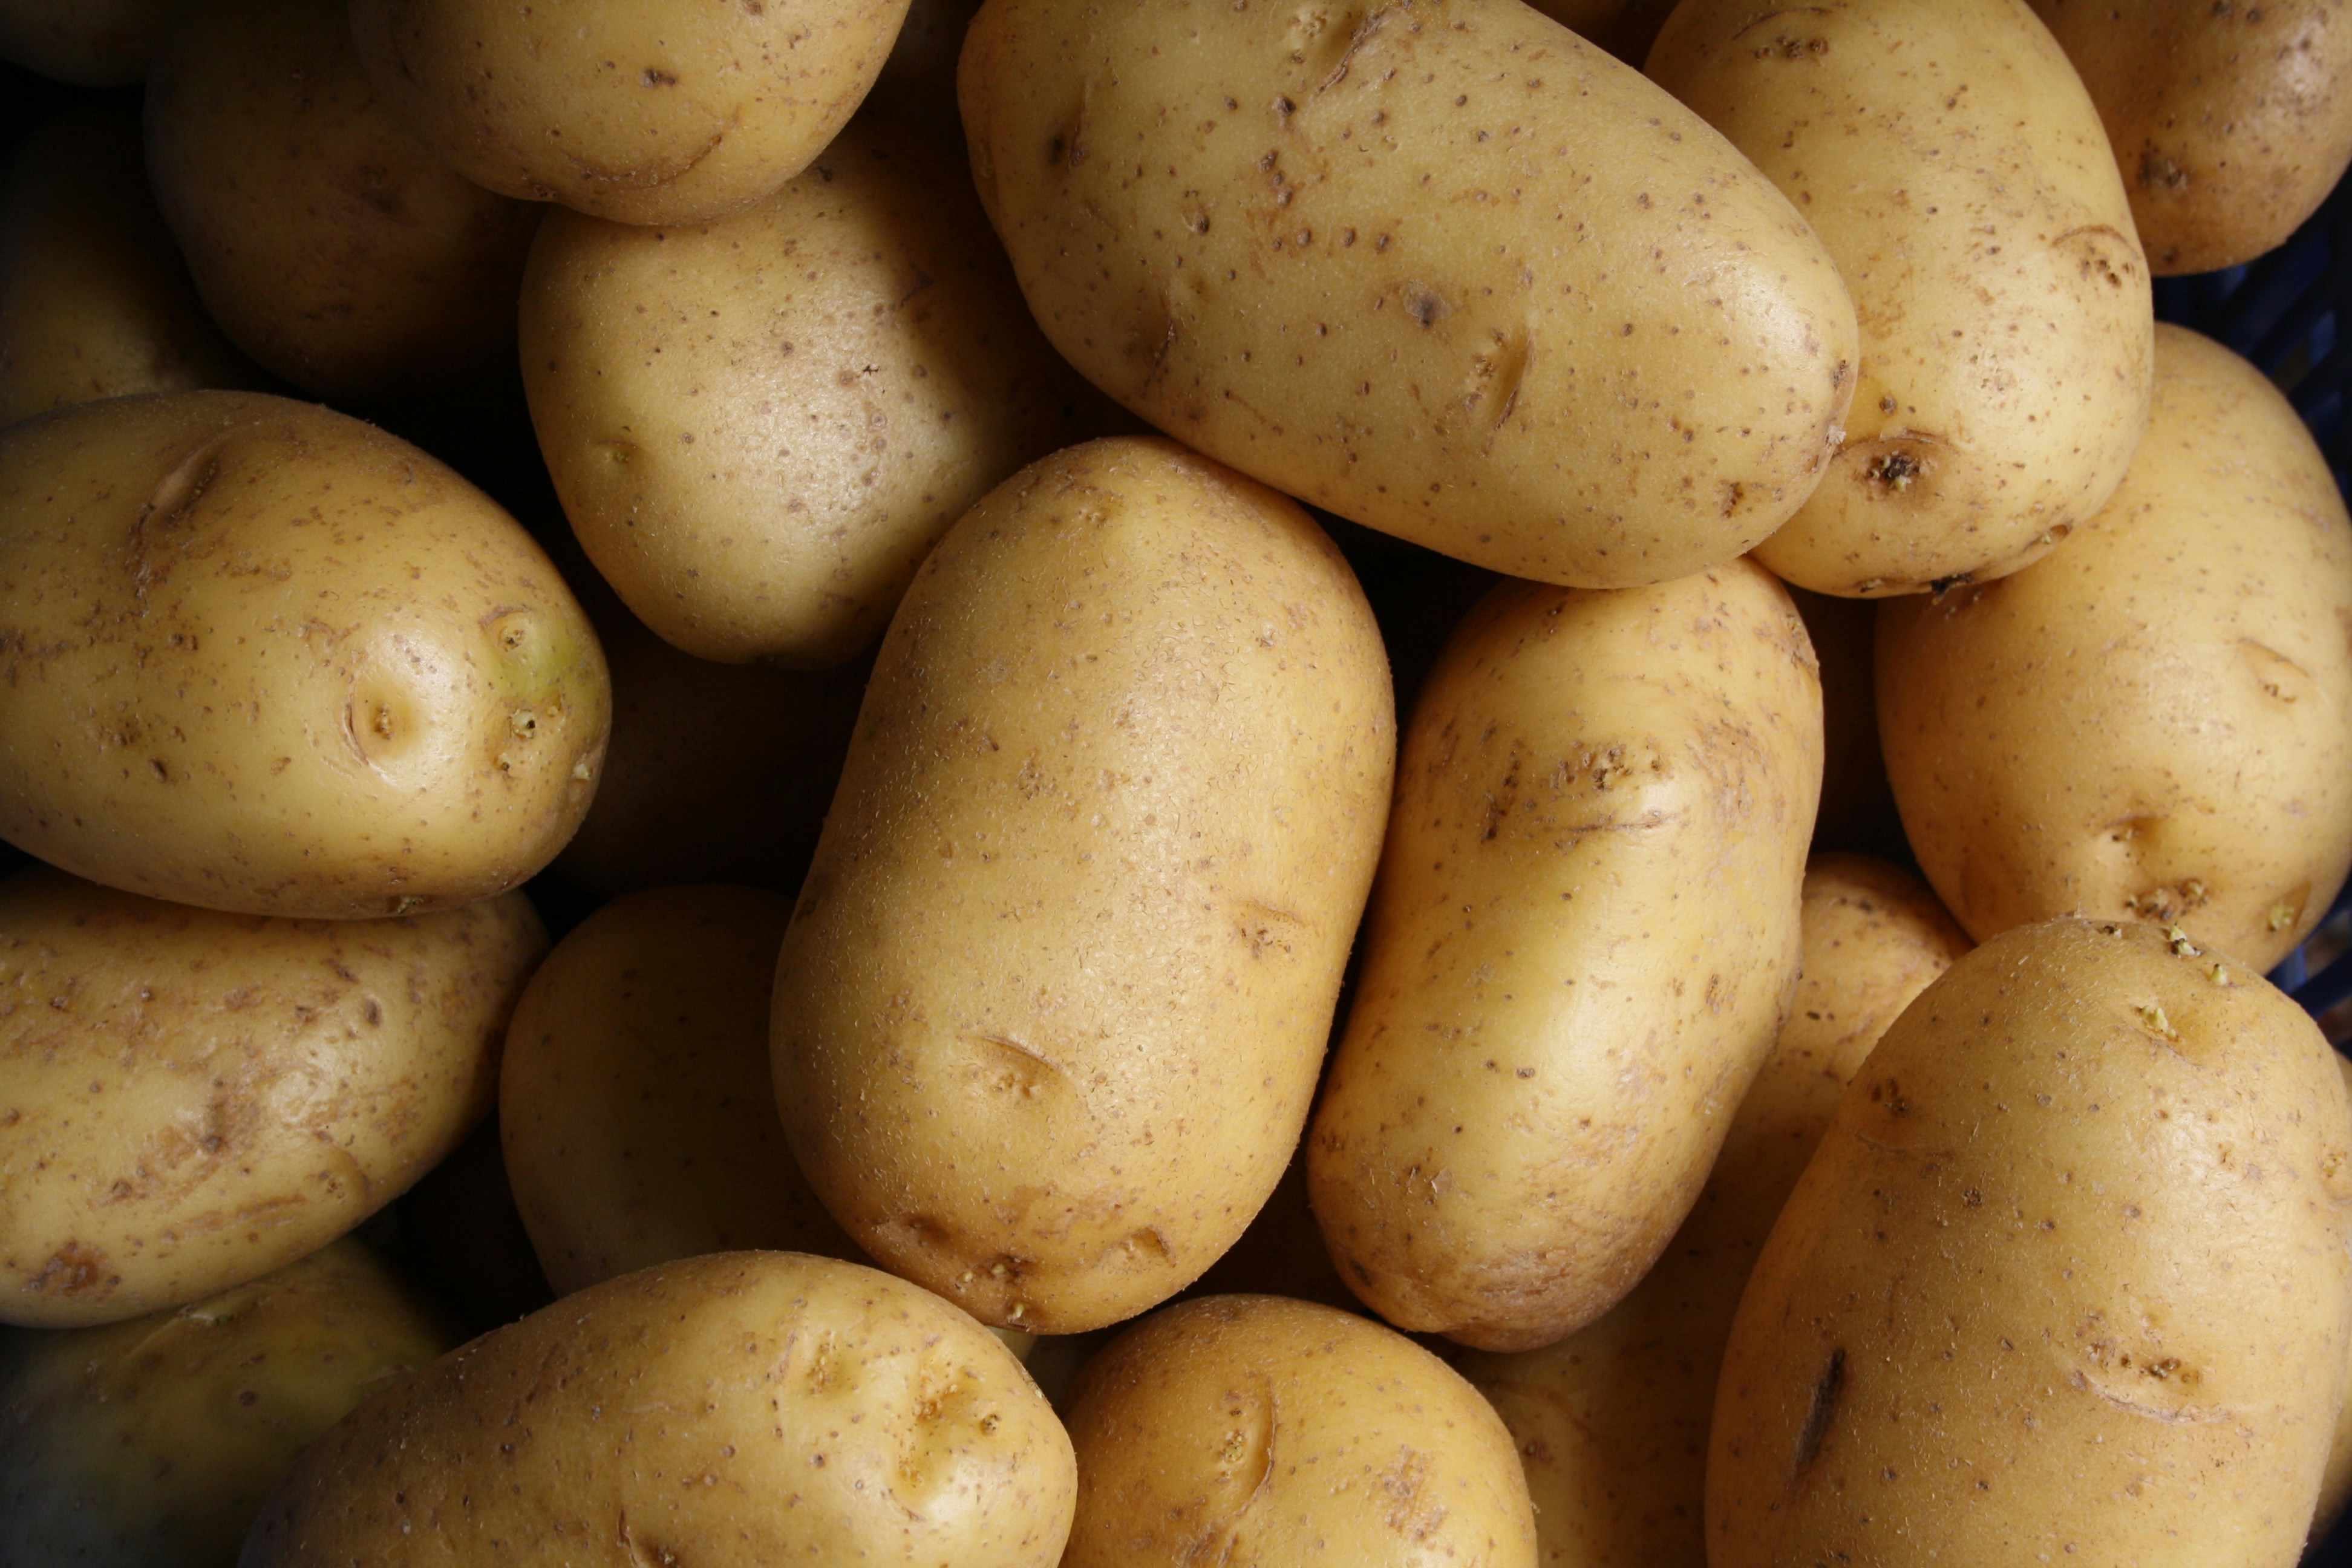 Potato prices increased, 400 metric tons imported from India